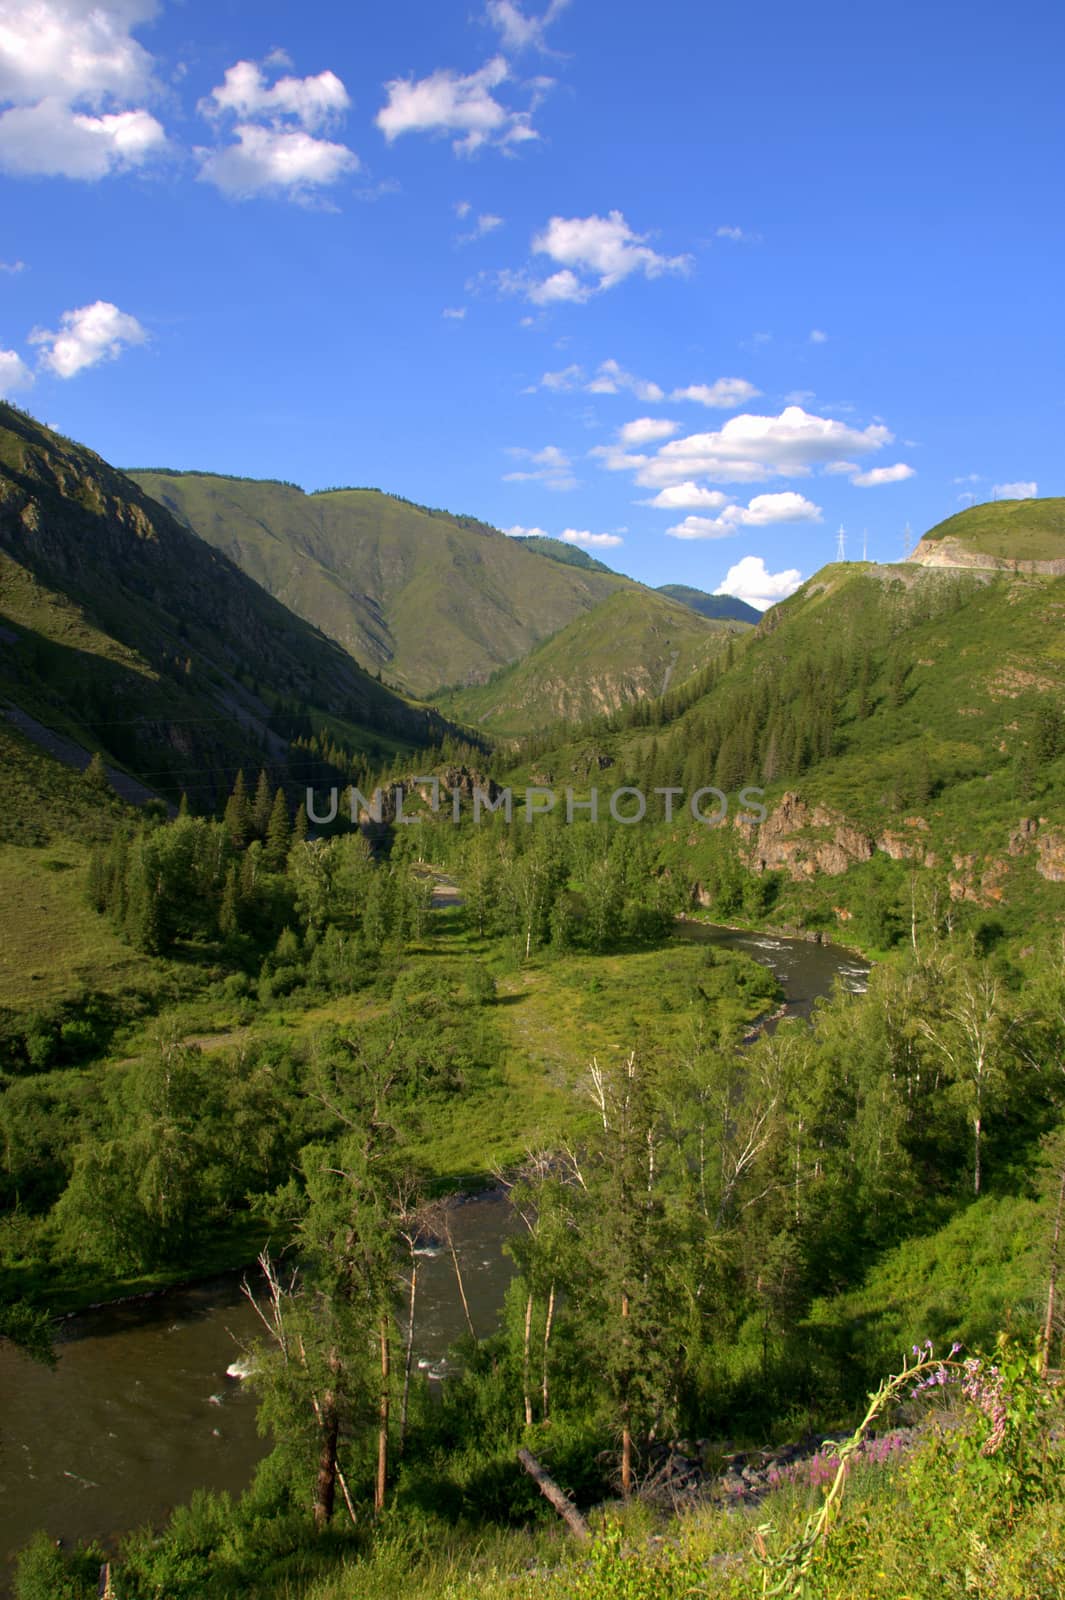 A picturesque valley with a river flowing through it, surrounded by fields and coniferous forests. Altai, Siberia, Russia.